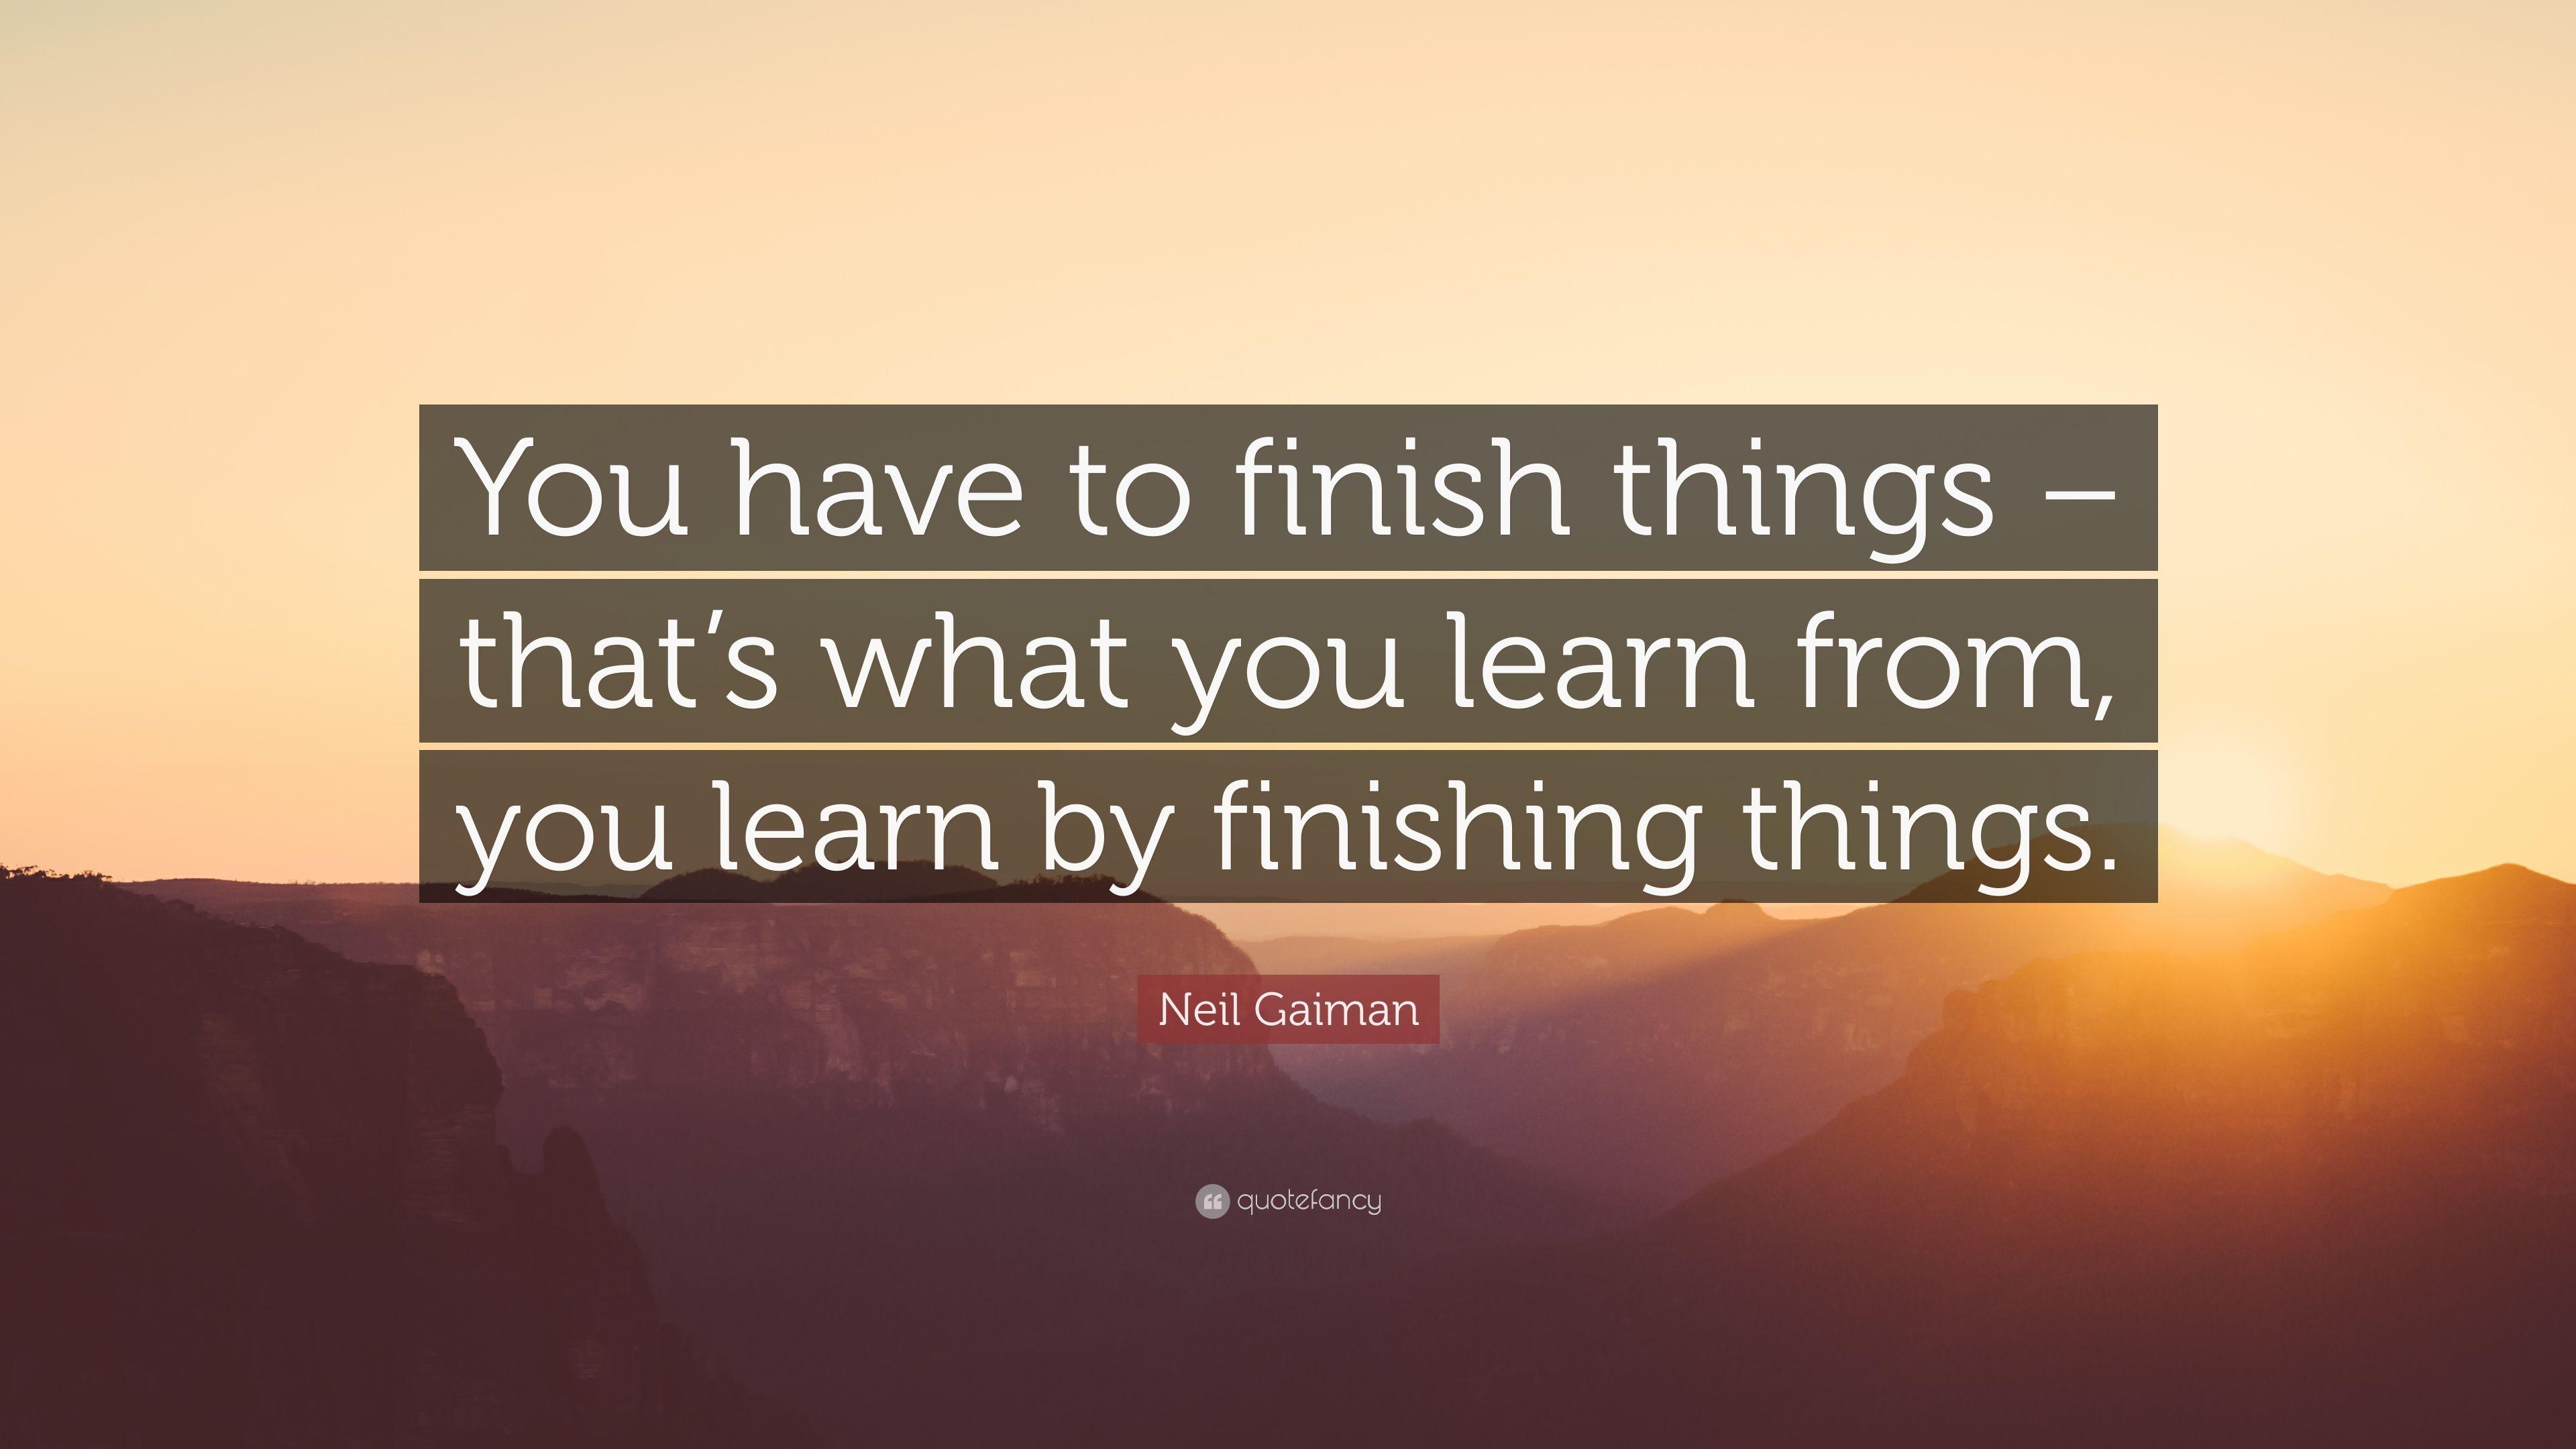 Neil Gaiman Quote: “You have to finish things